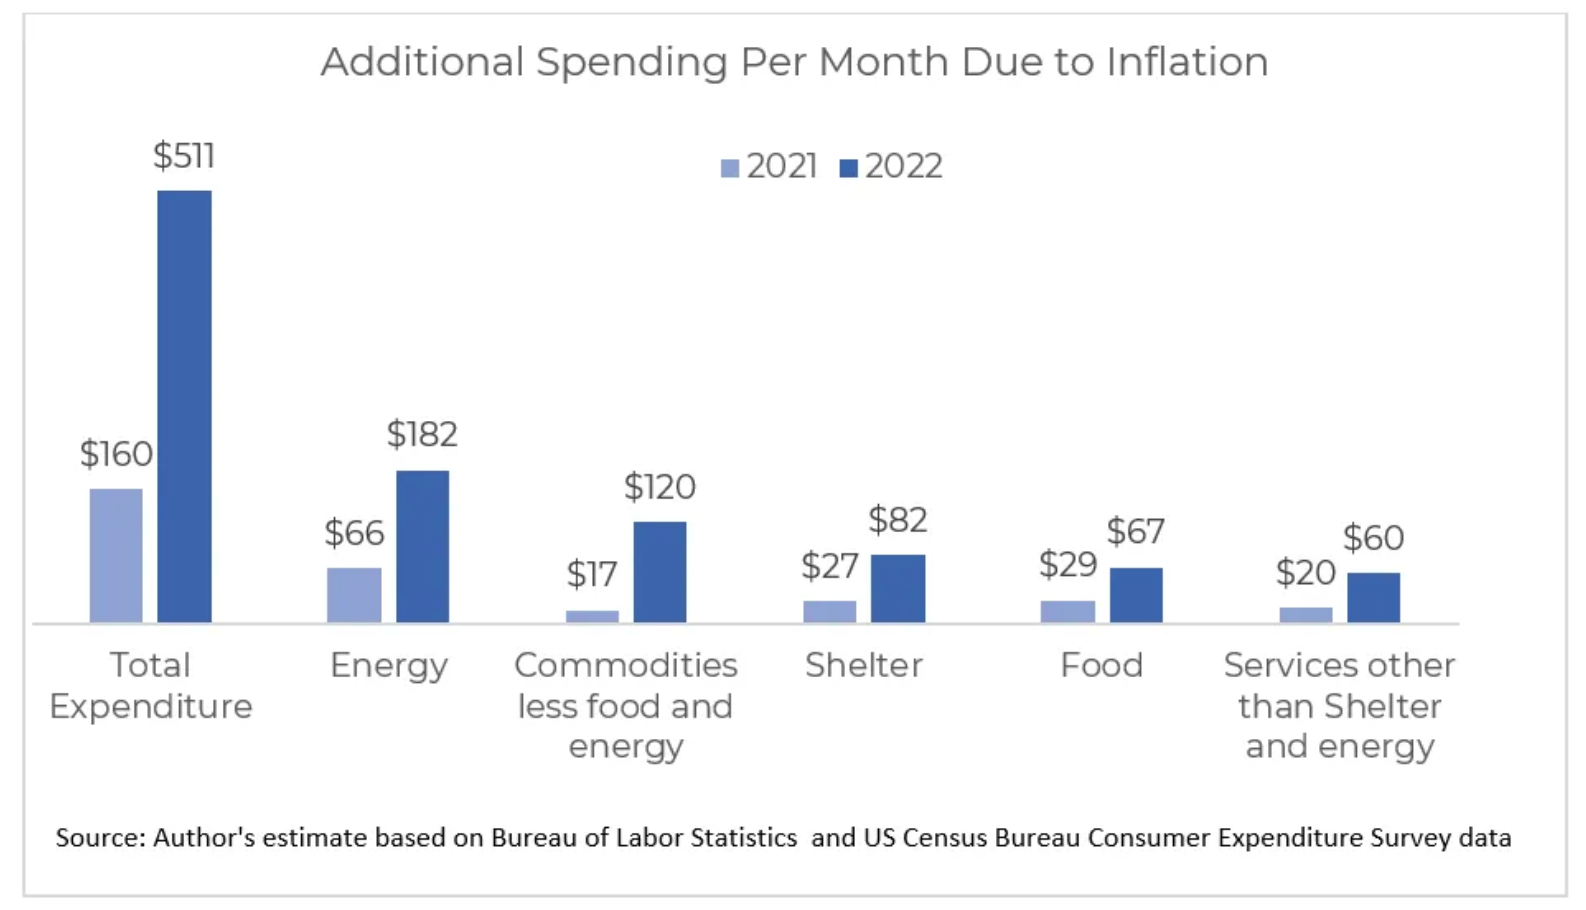 A bar chart comparing the additional spending per month due to inflation from 2021 to 2022.